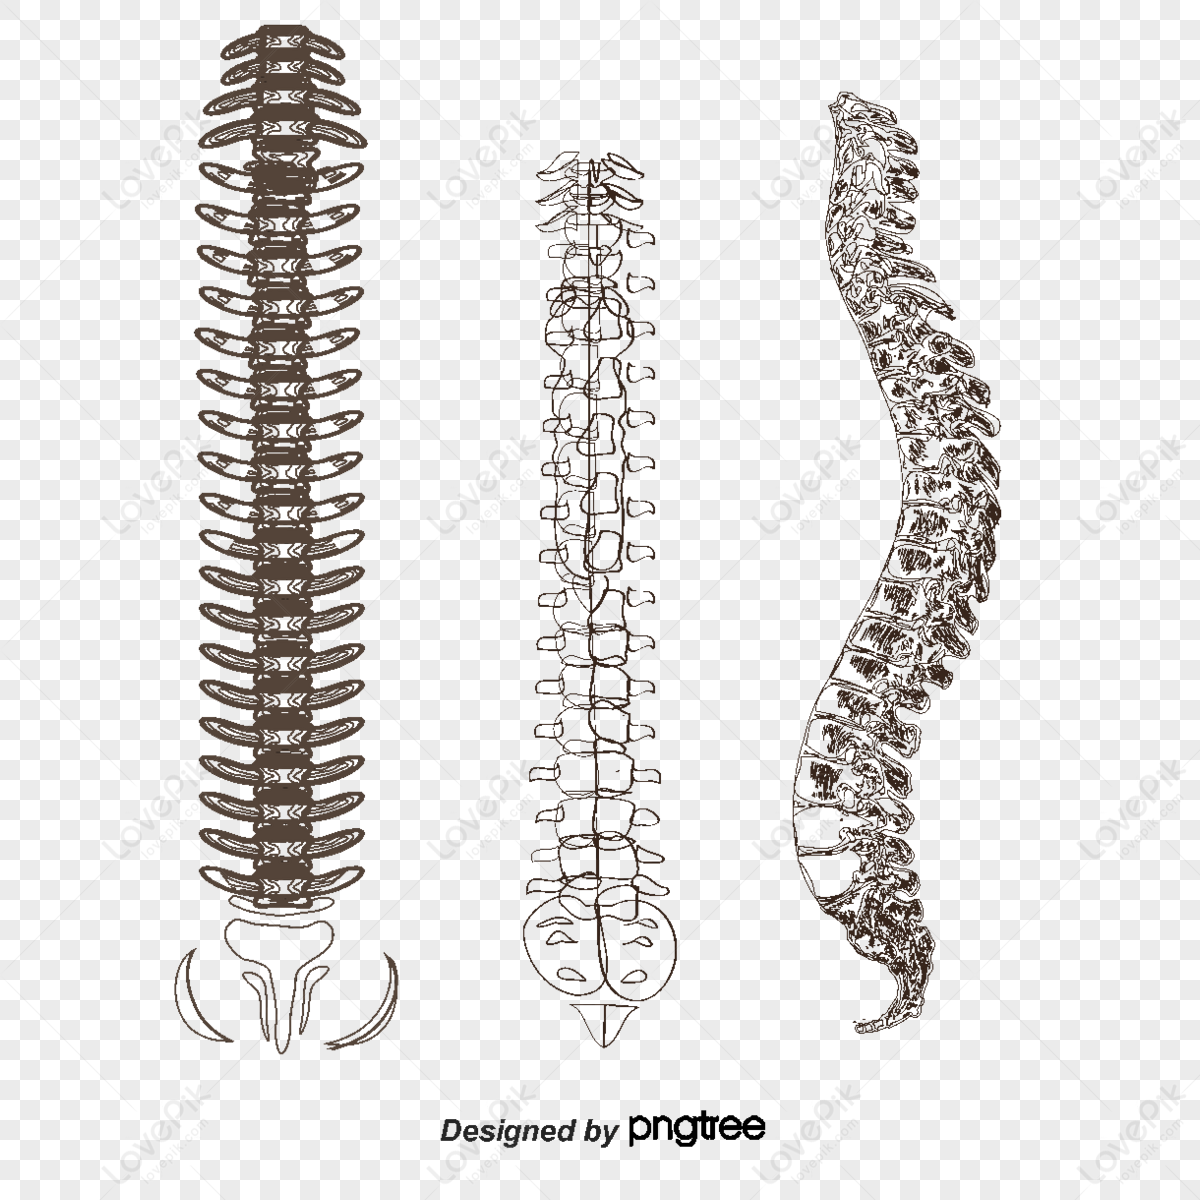 Spinal Cord Schematic Diagram Stock Illustration - Download Image Now -  Spine - Body Part, Anatomy, Human Nervous System - iStock